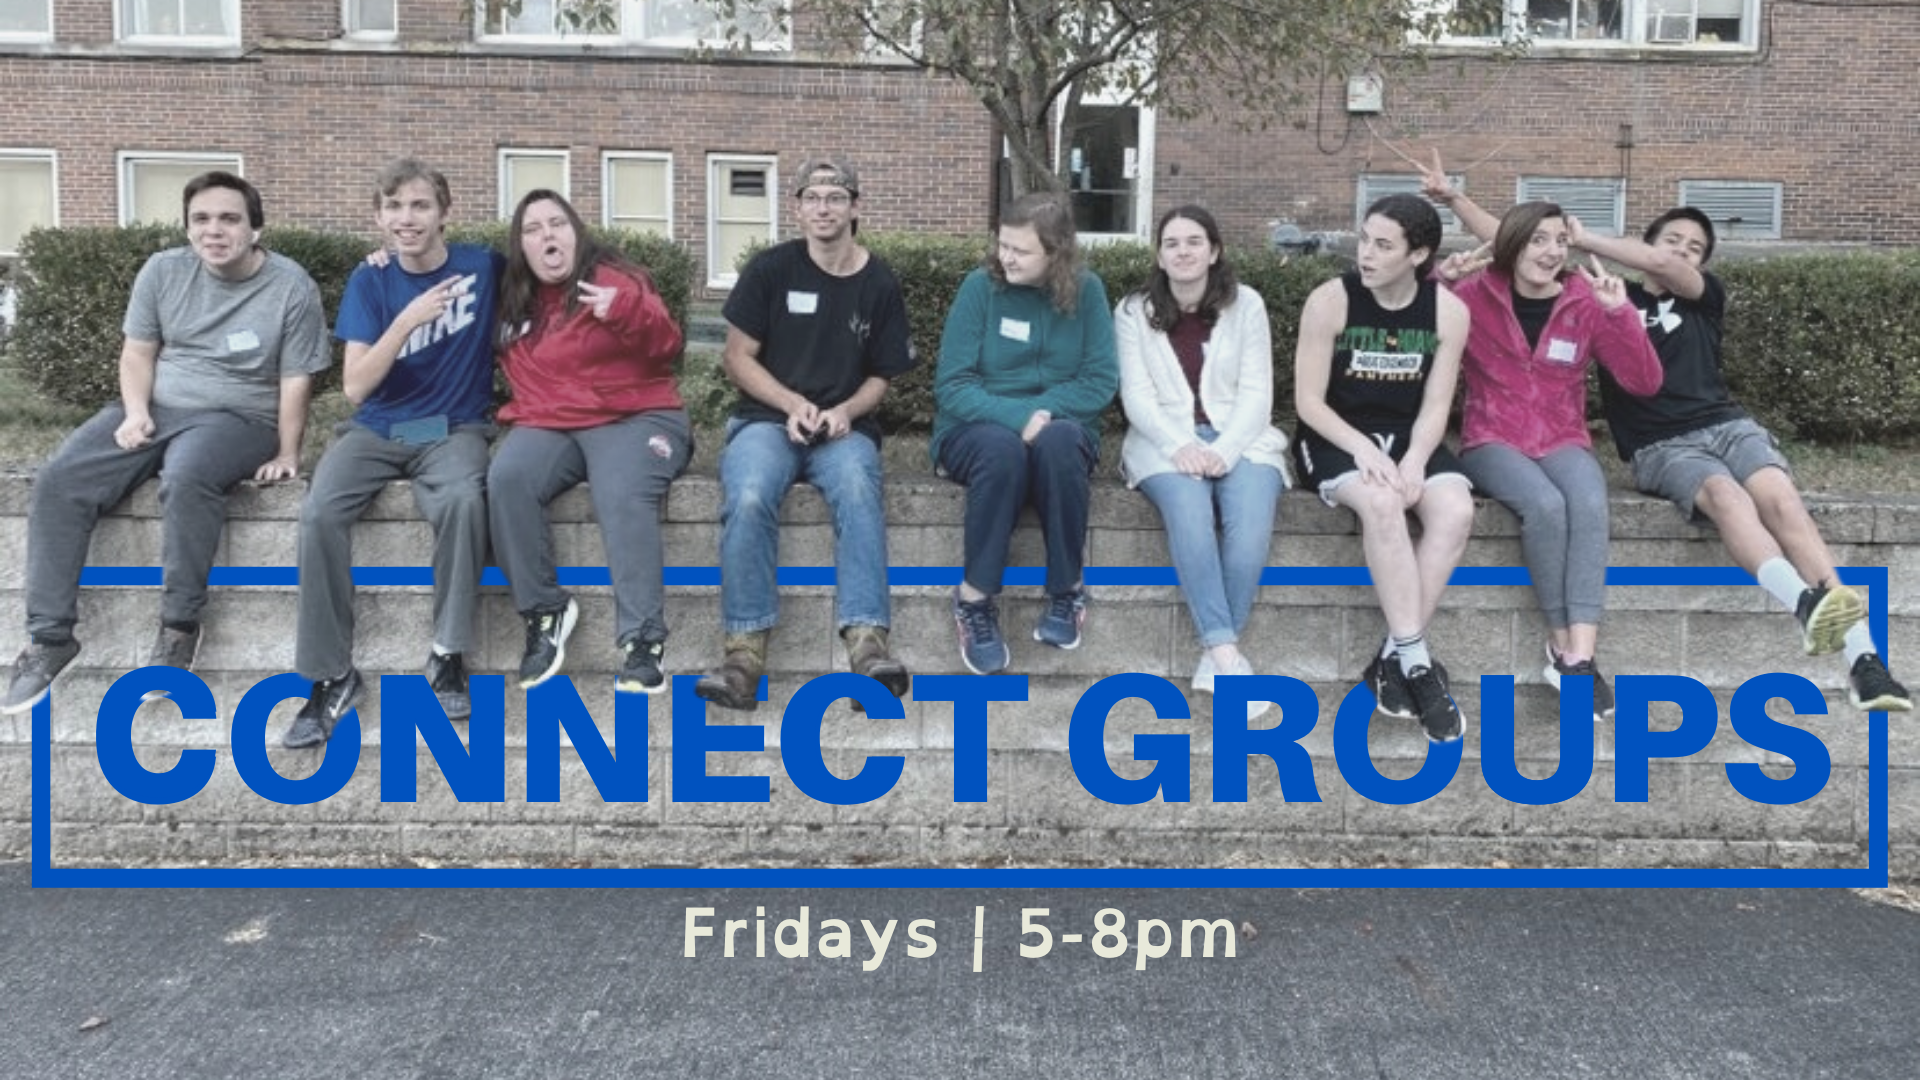 a group of young adults with blue words that say "connect groups"